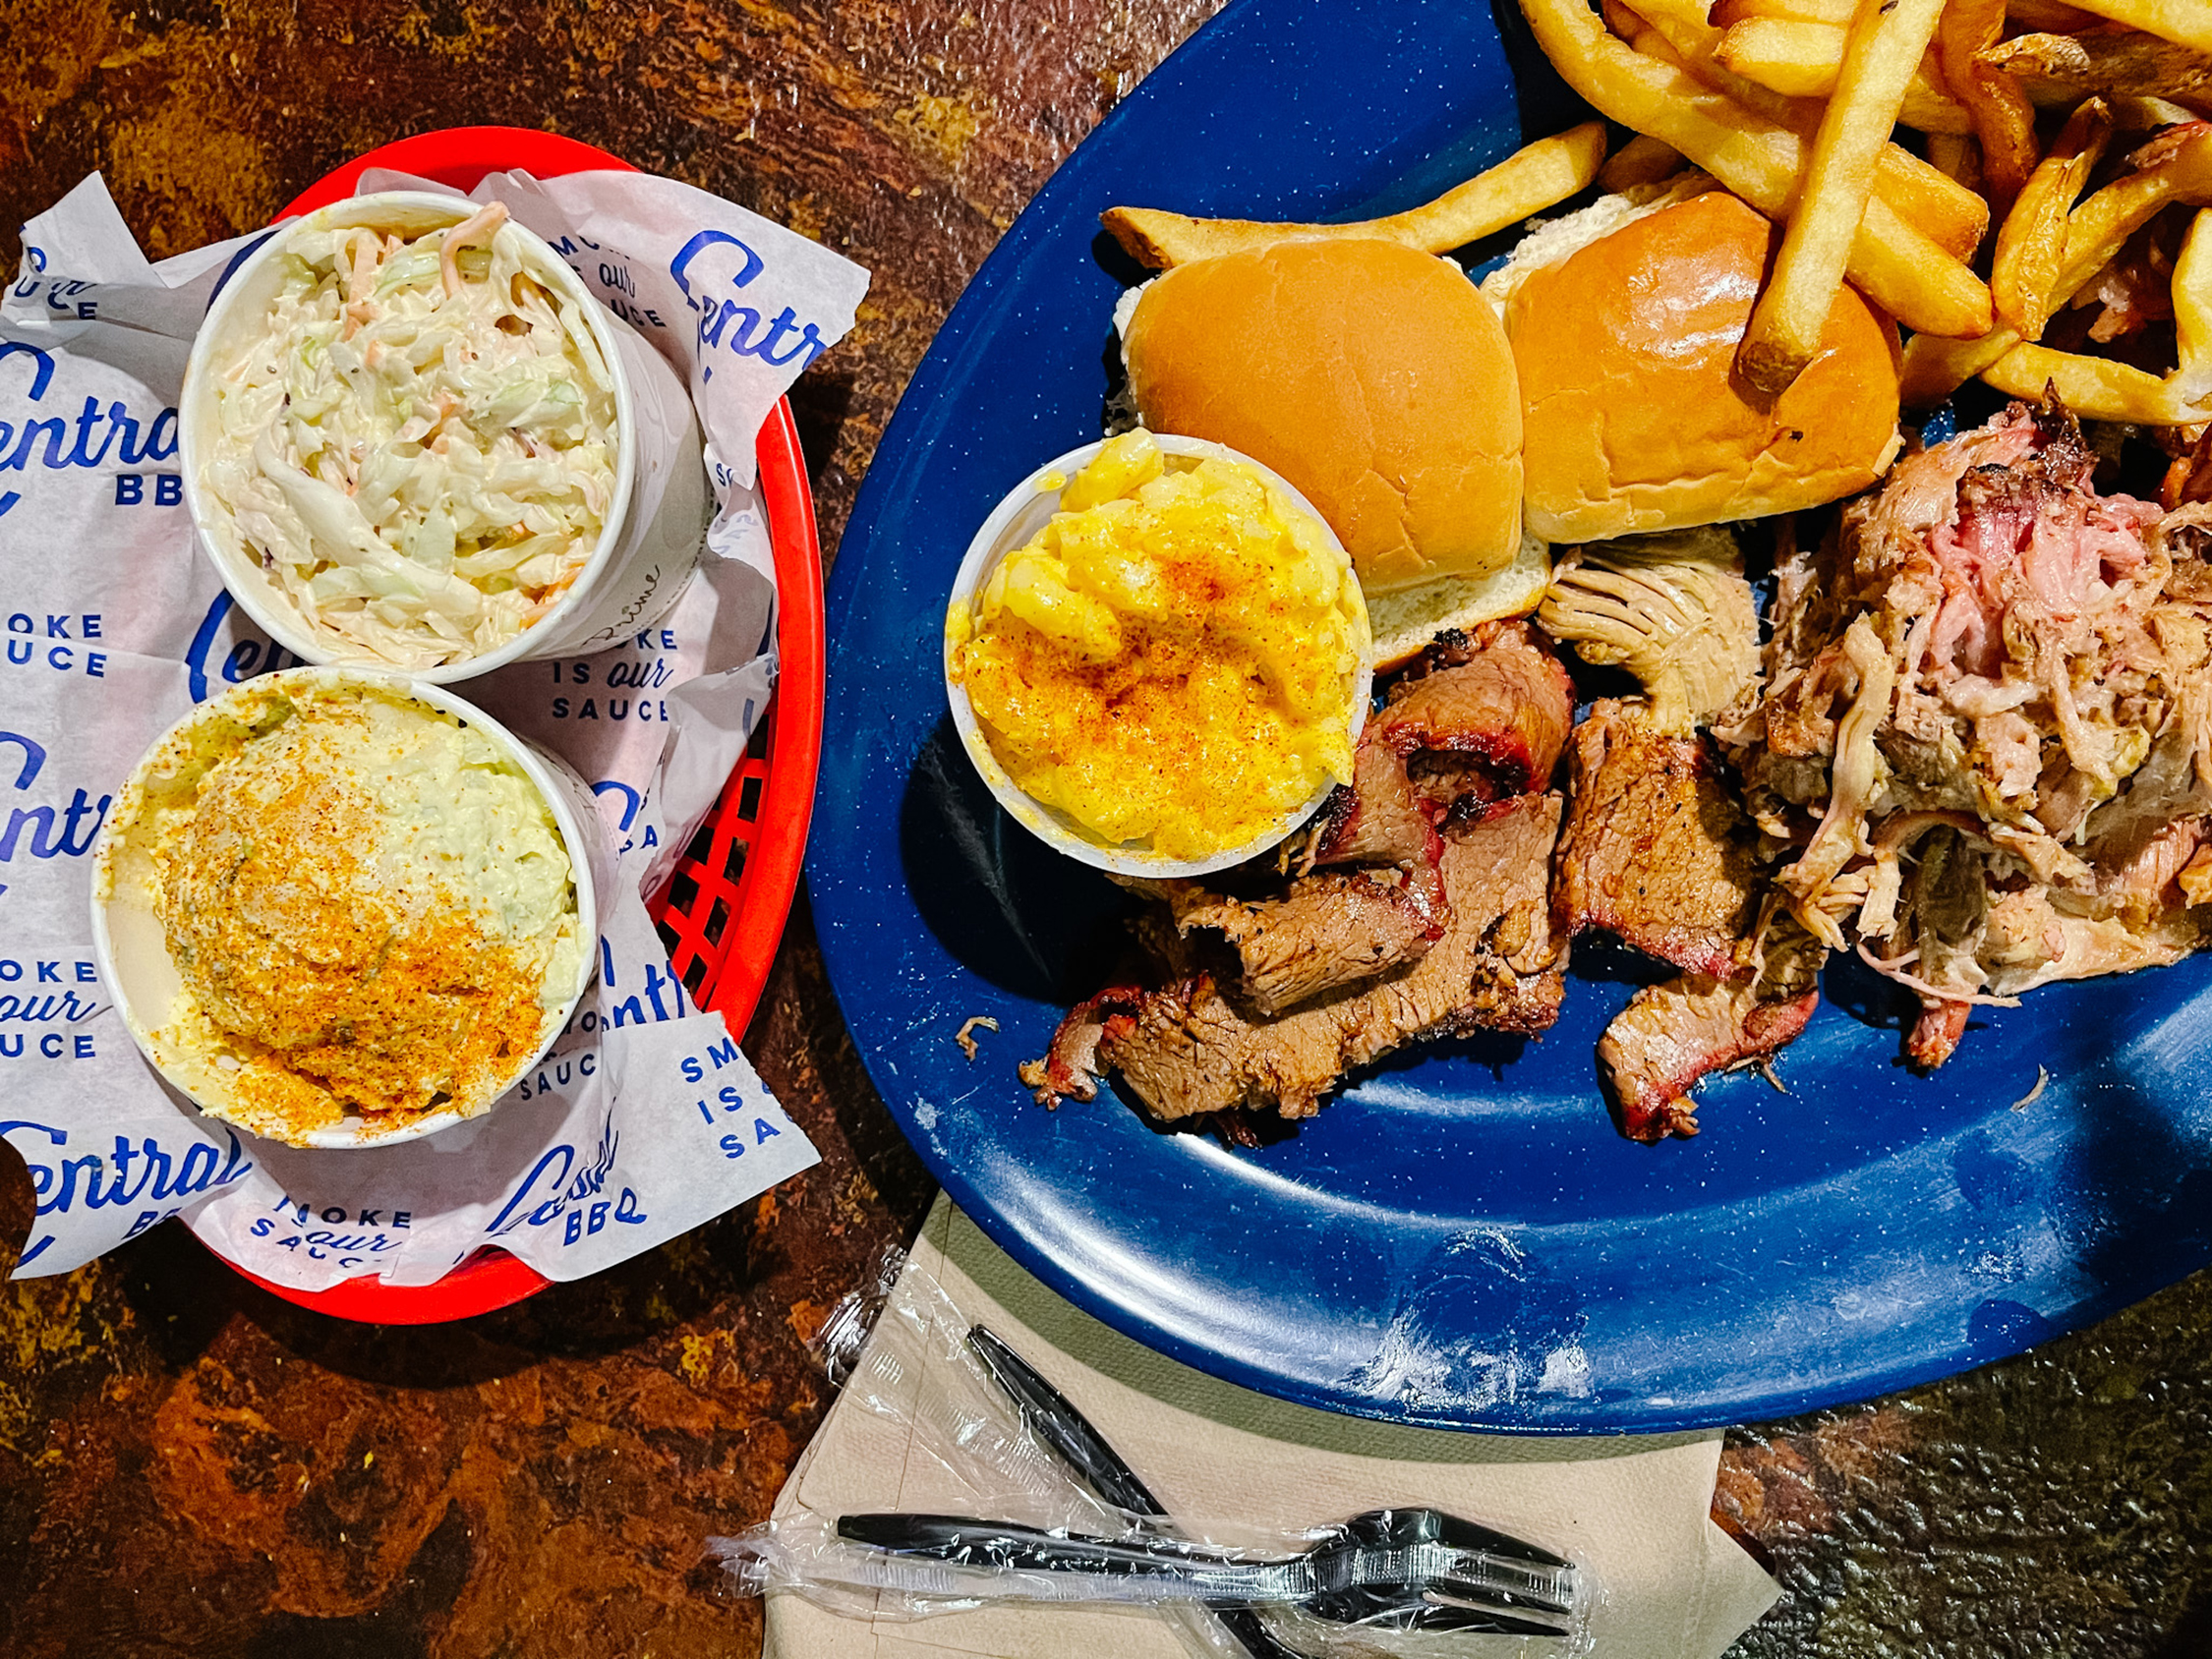 Central BBQ in Memphis, TN | Finding Beautiful Truth